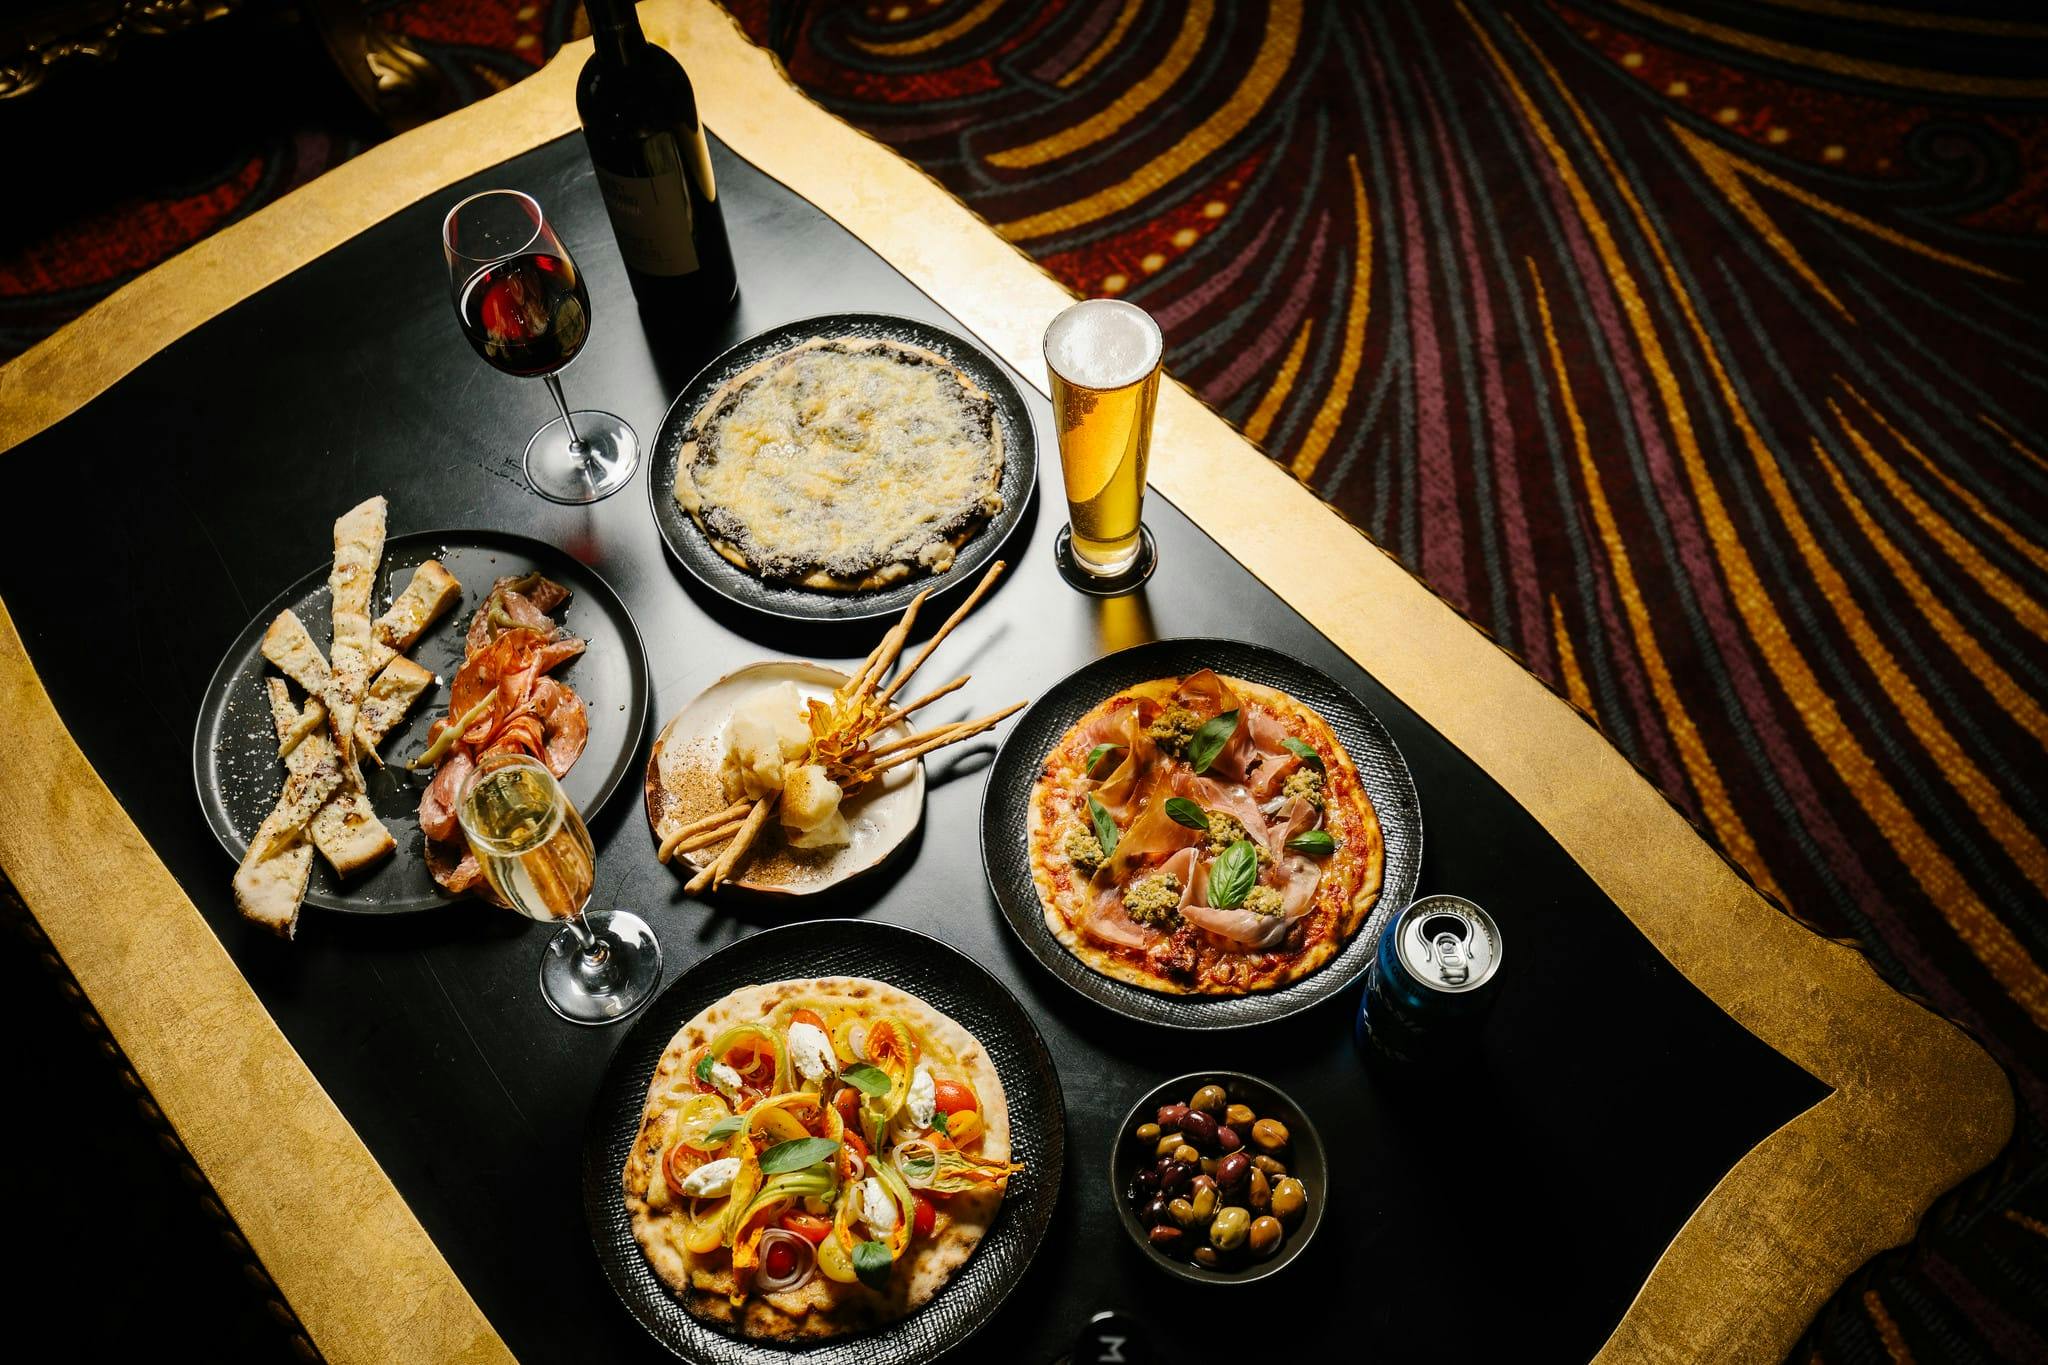 A black table with gold trim on luxurious carpet set with pizza, grissini, olives, wine and beer.